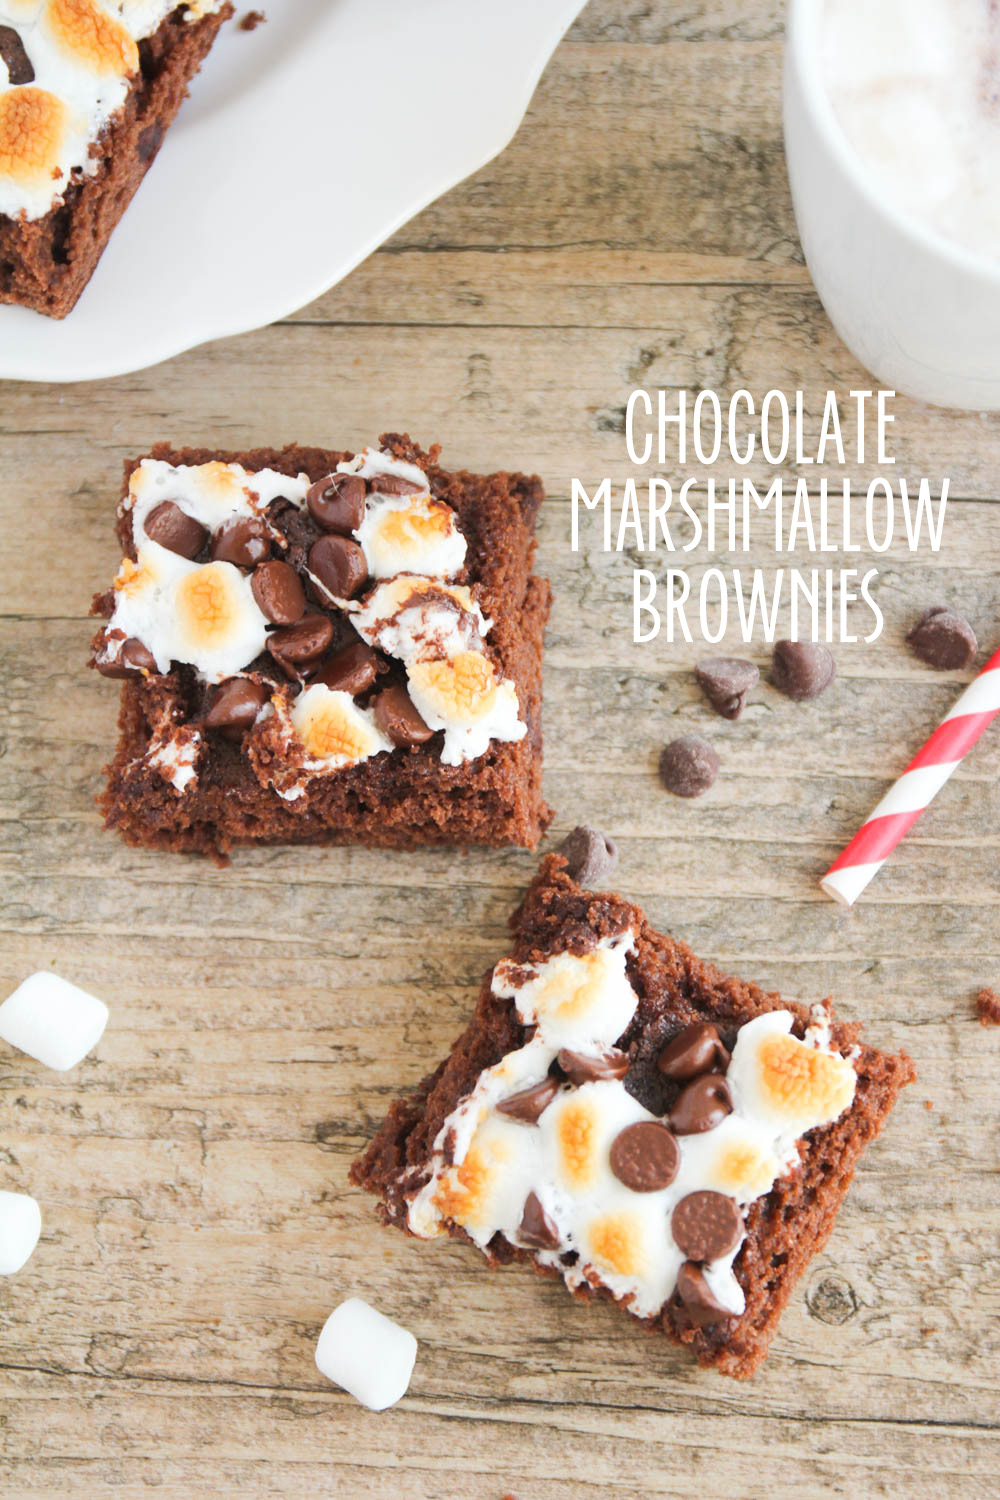 These chocolate marshmallow brownies are ooey-gooey delicious, and perfect with a warm mug of TruMoo chocolate milk!